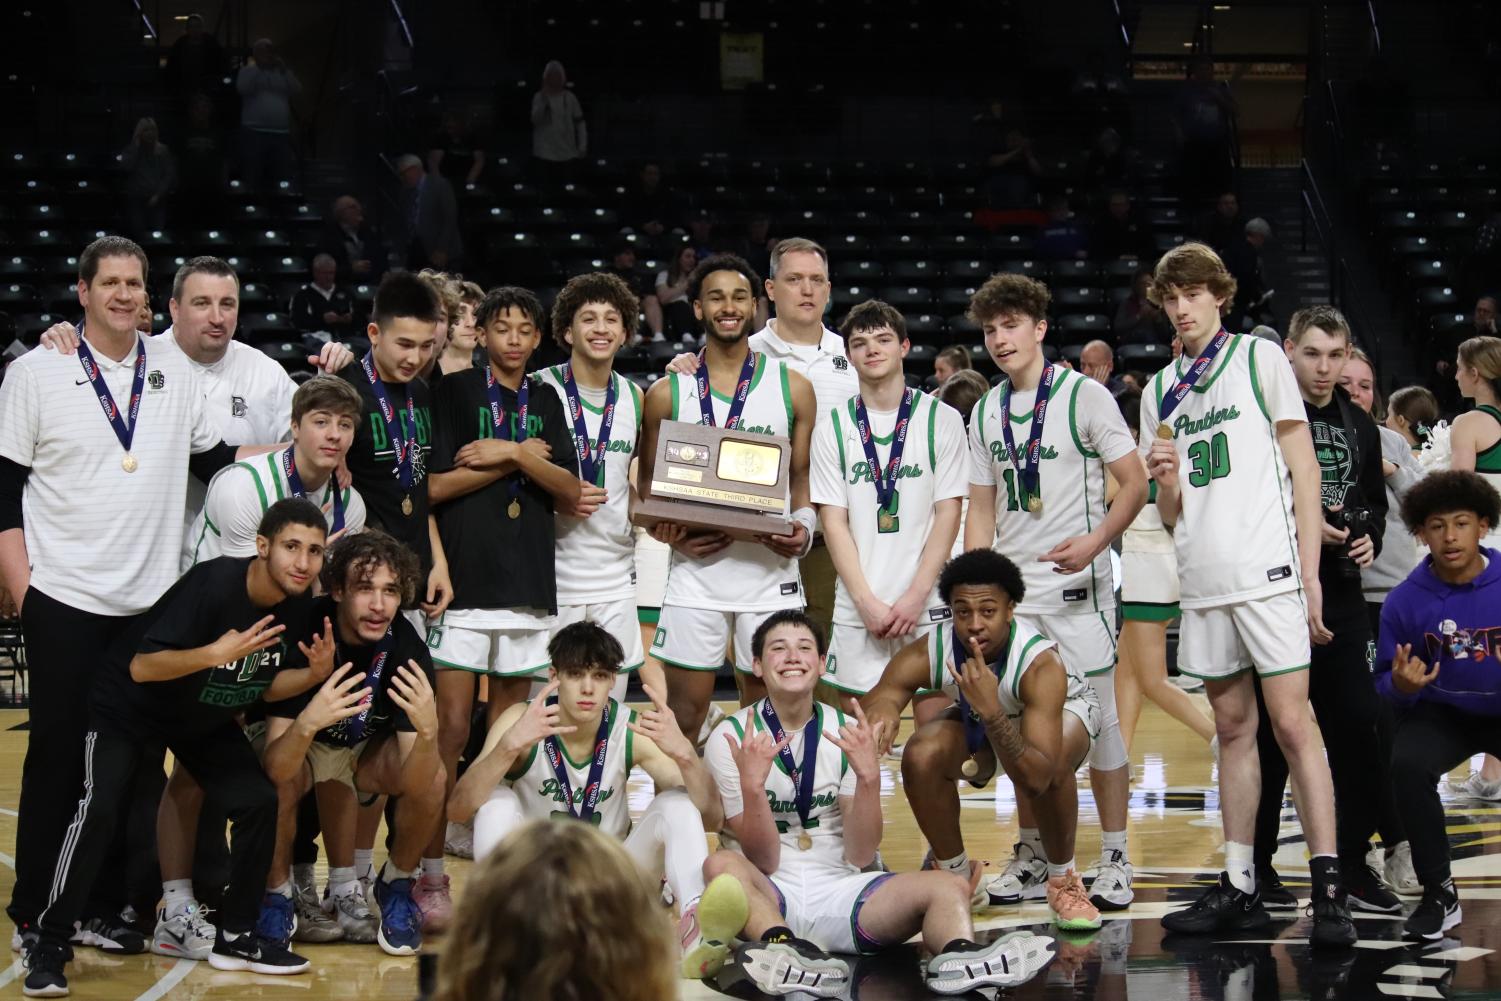 Boys+basketball+finishes+third+in+Class+6A+with+overtime+thriller+%28Photos+by+Joselyn+Steele%29